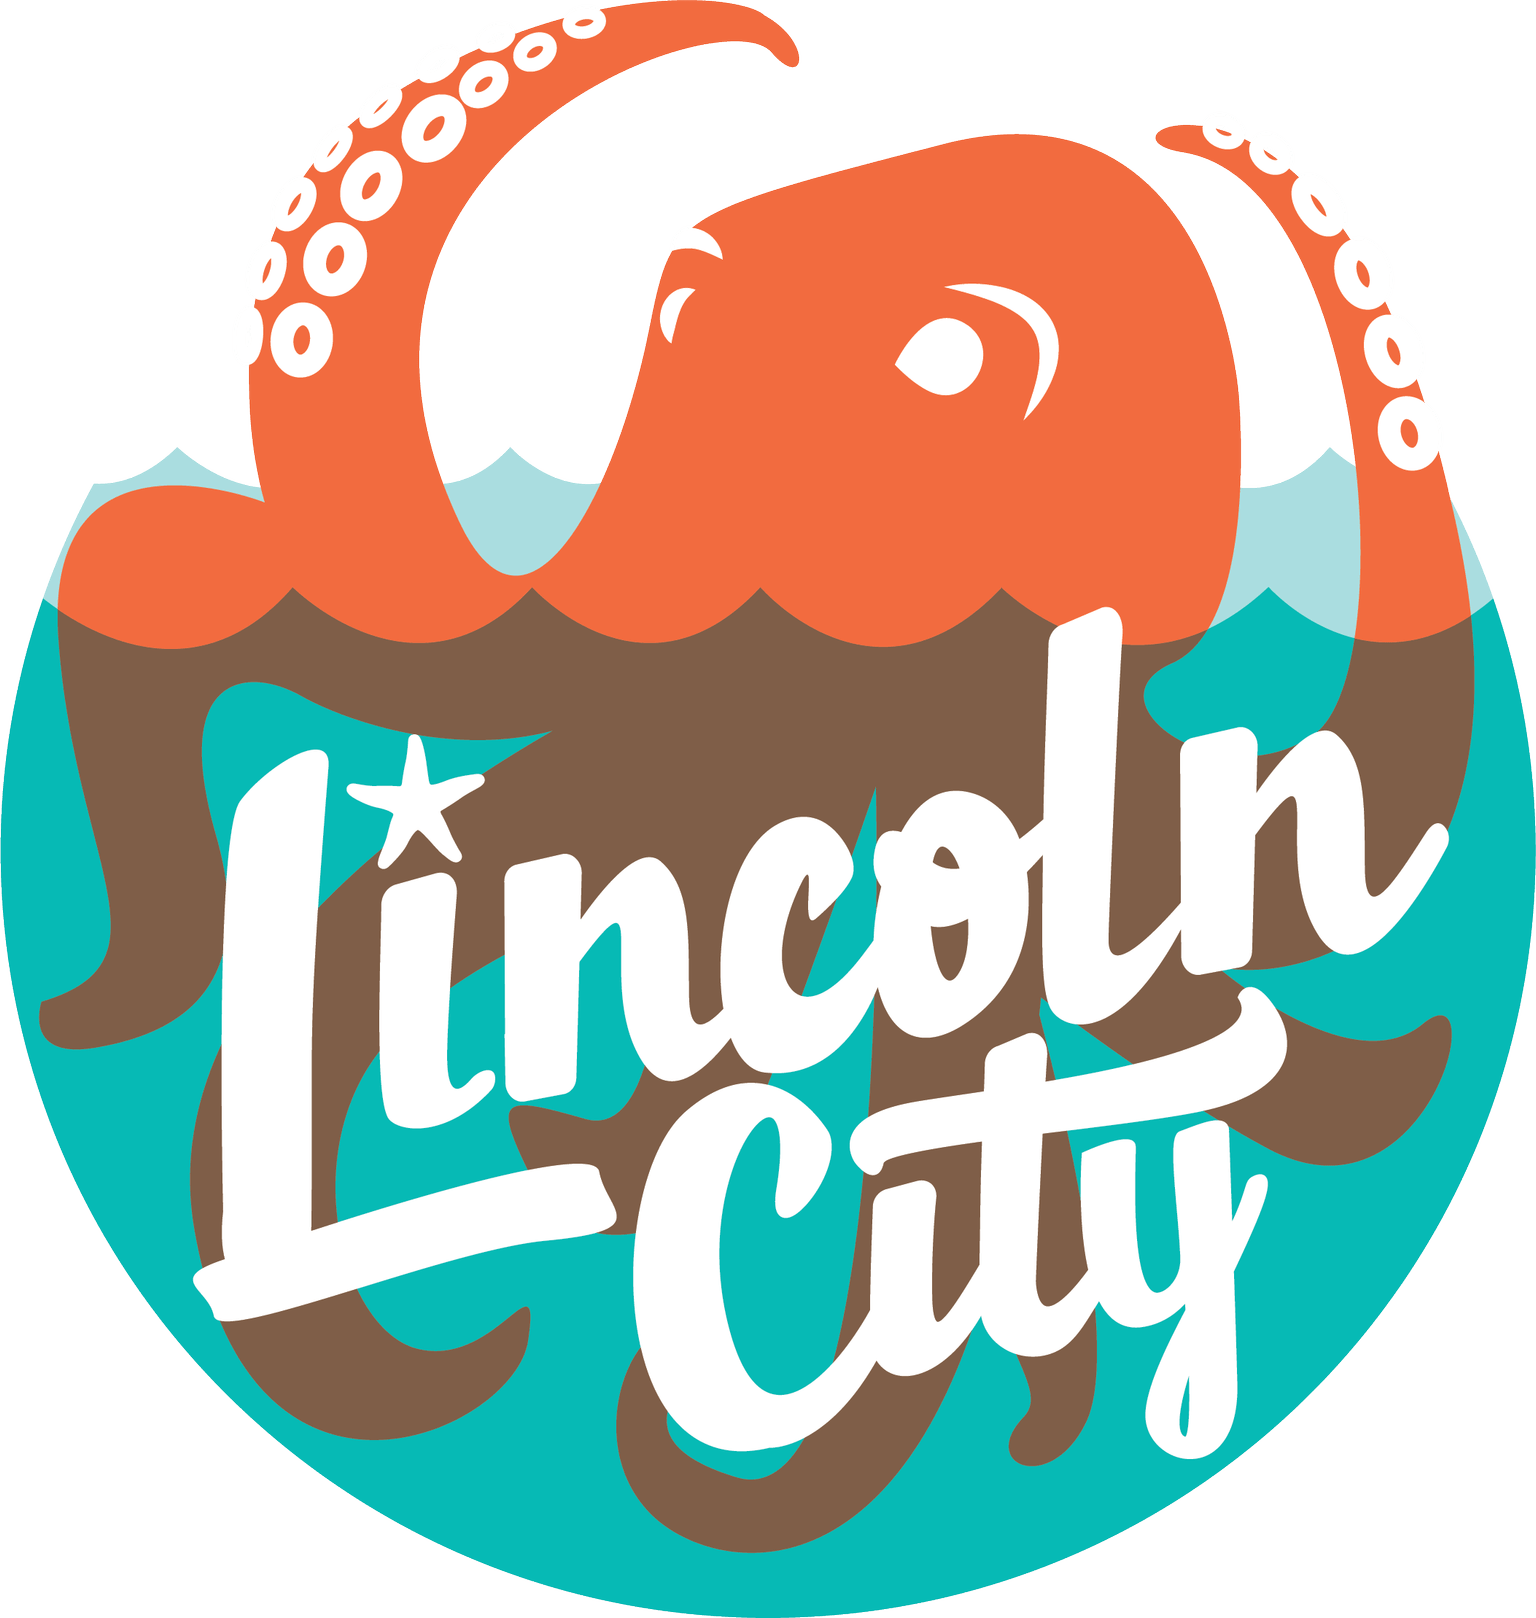 The City Logo - City of Lincoln City, OR